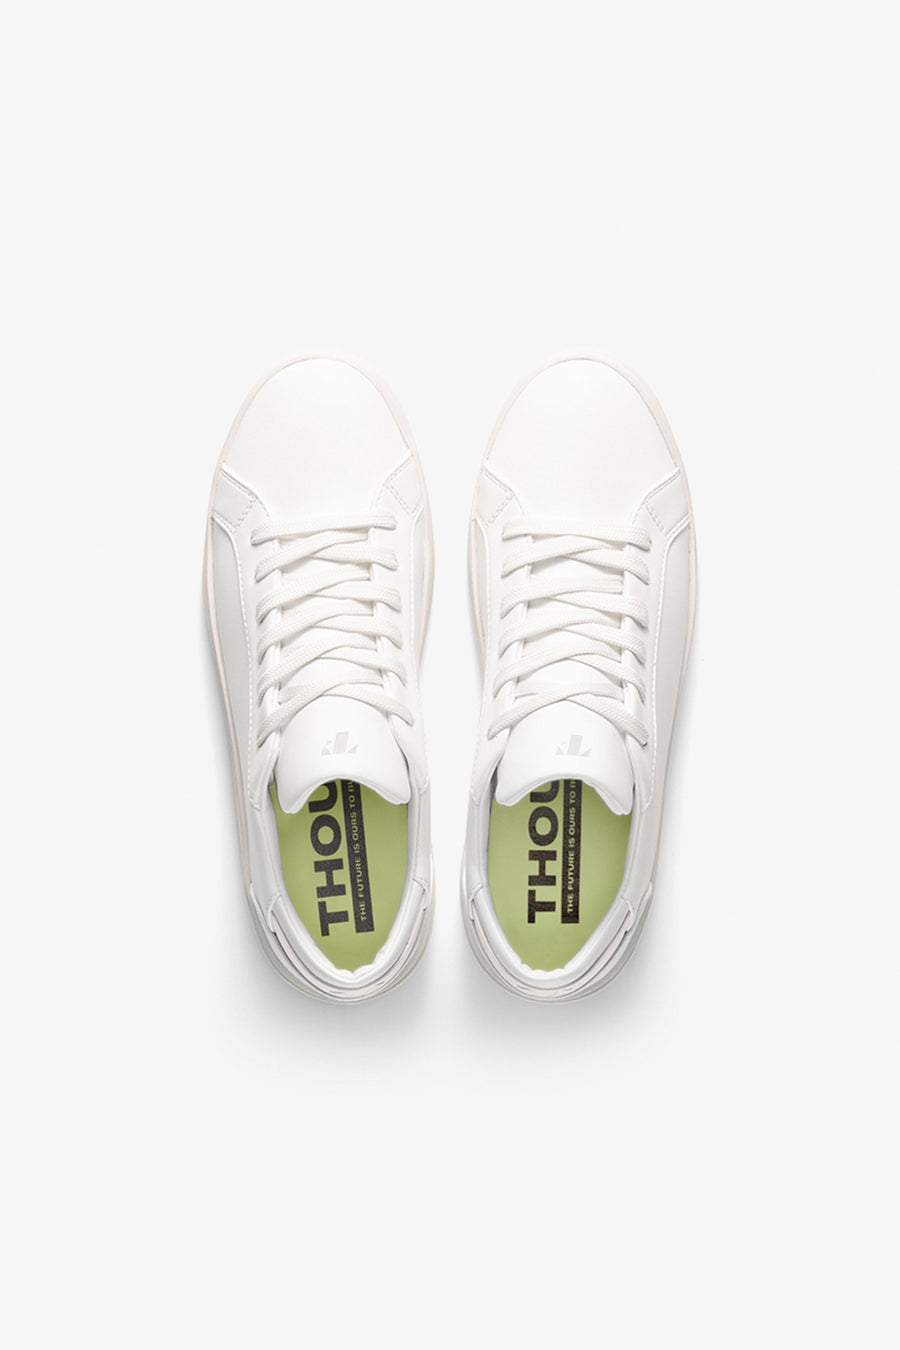 Thousand Fell Lace Up Sneakers - White